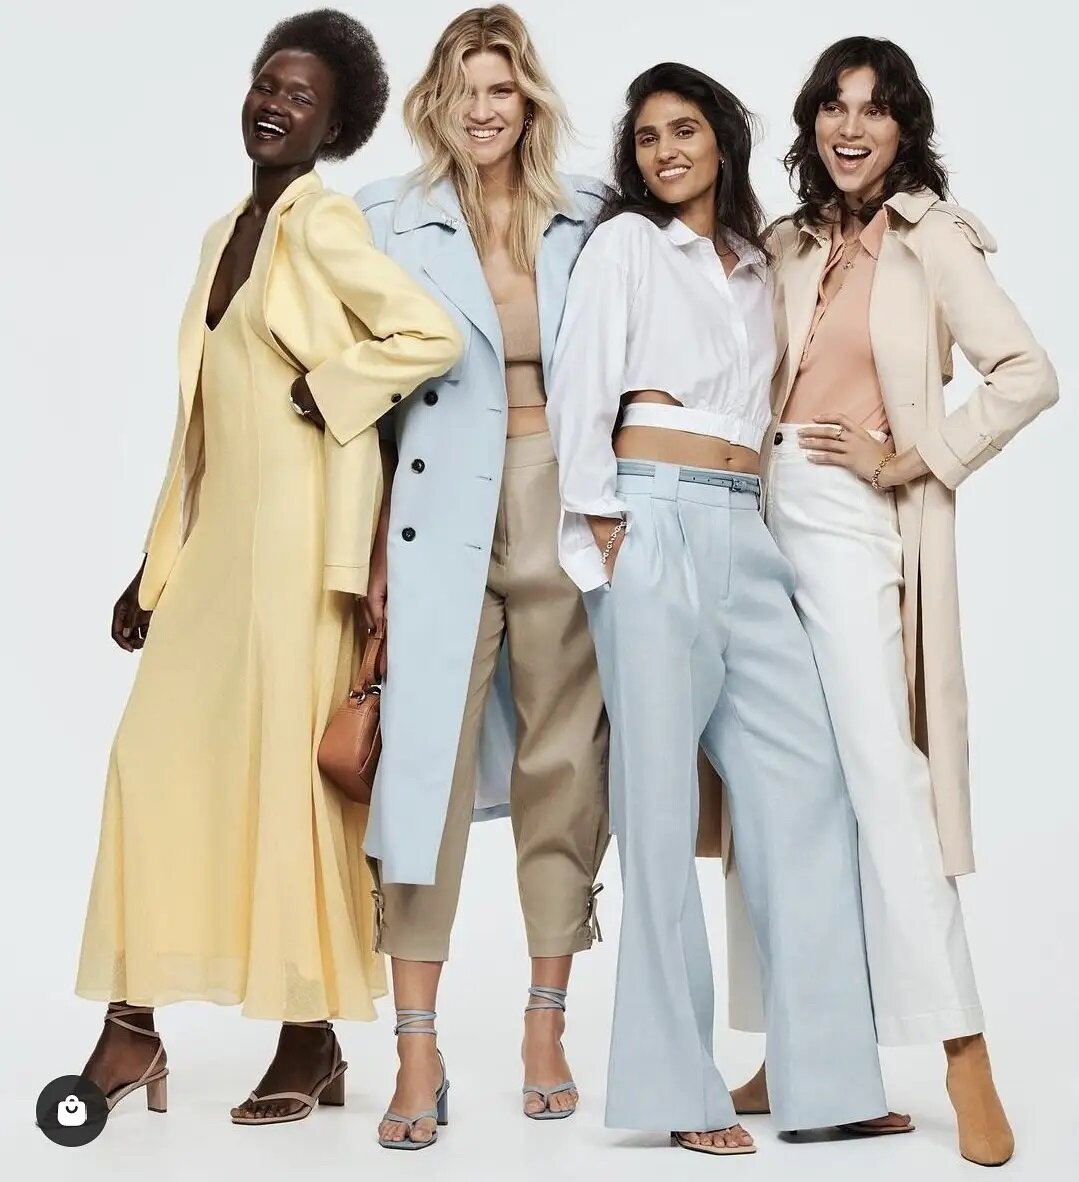 SPOTTED! 
A yellow blazer in the latest @witchery collection which feels so light and airy it literally feels like you can almost touch Spring!  Swipe for a closer look at the blazer - very similar to the one Hailey Beiber is wearing in my post yeste